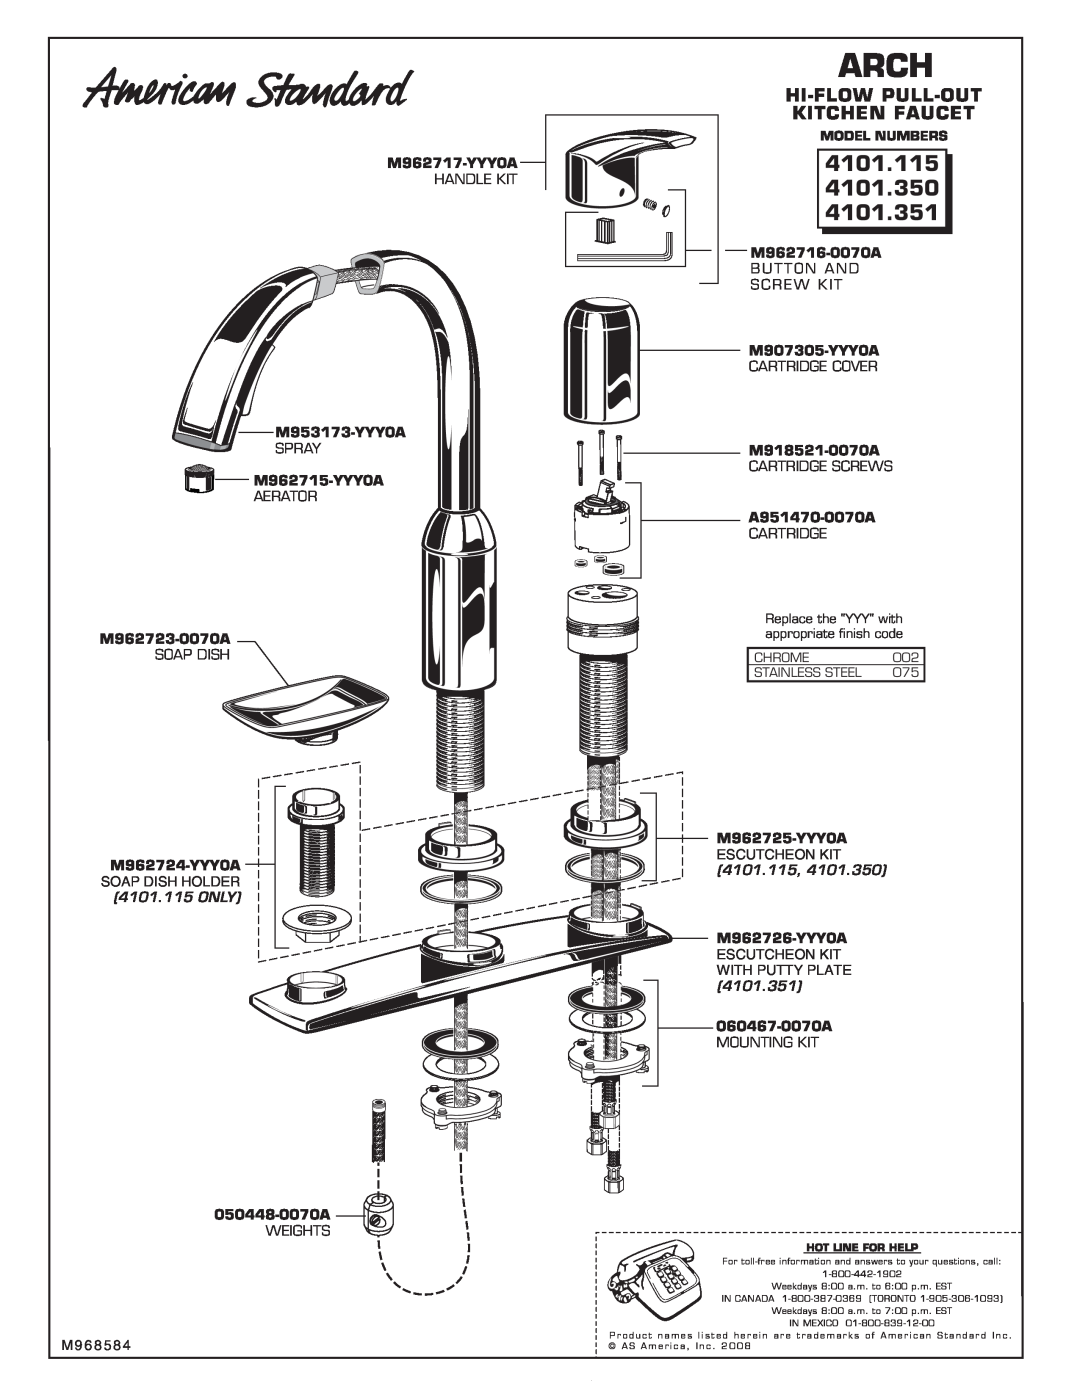 American Standard 4101.115 installation instructions Arch, 4101.350, 4101.351, Hi-Flow Pull-Out, Kitchen Faucet 